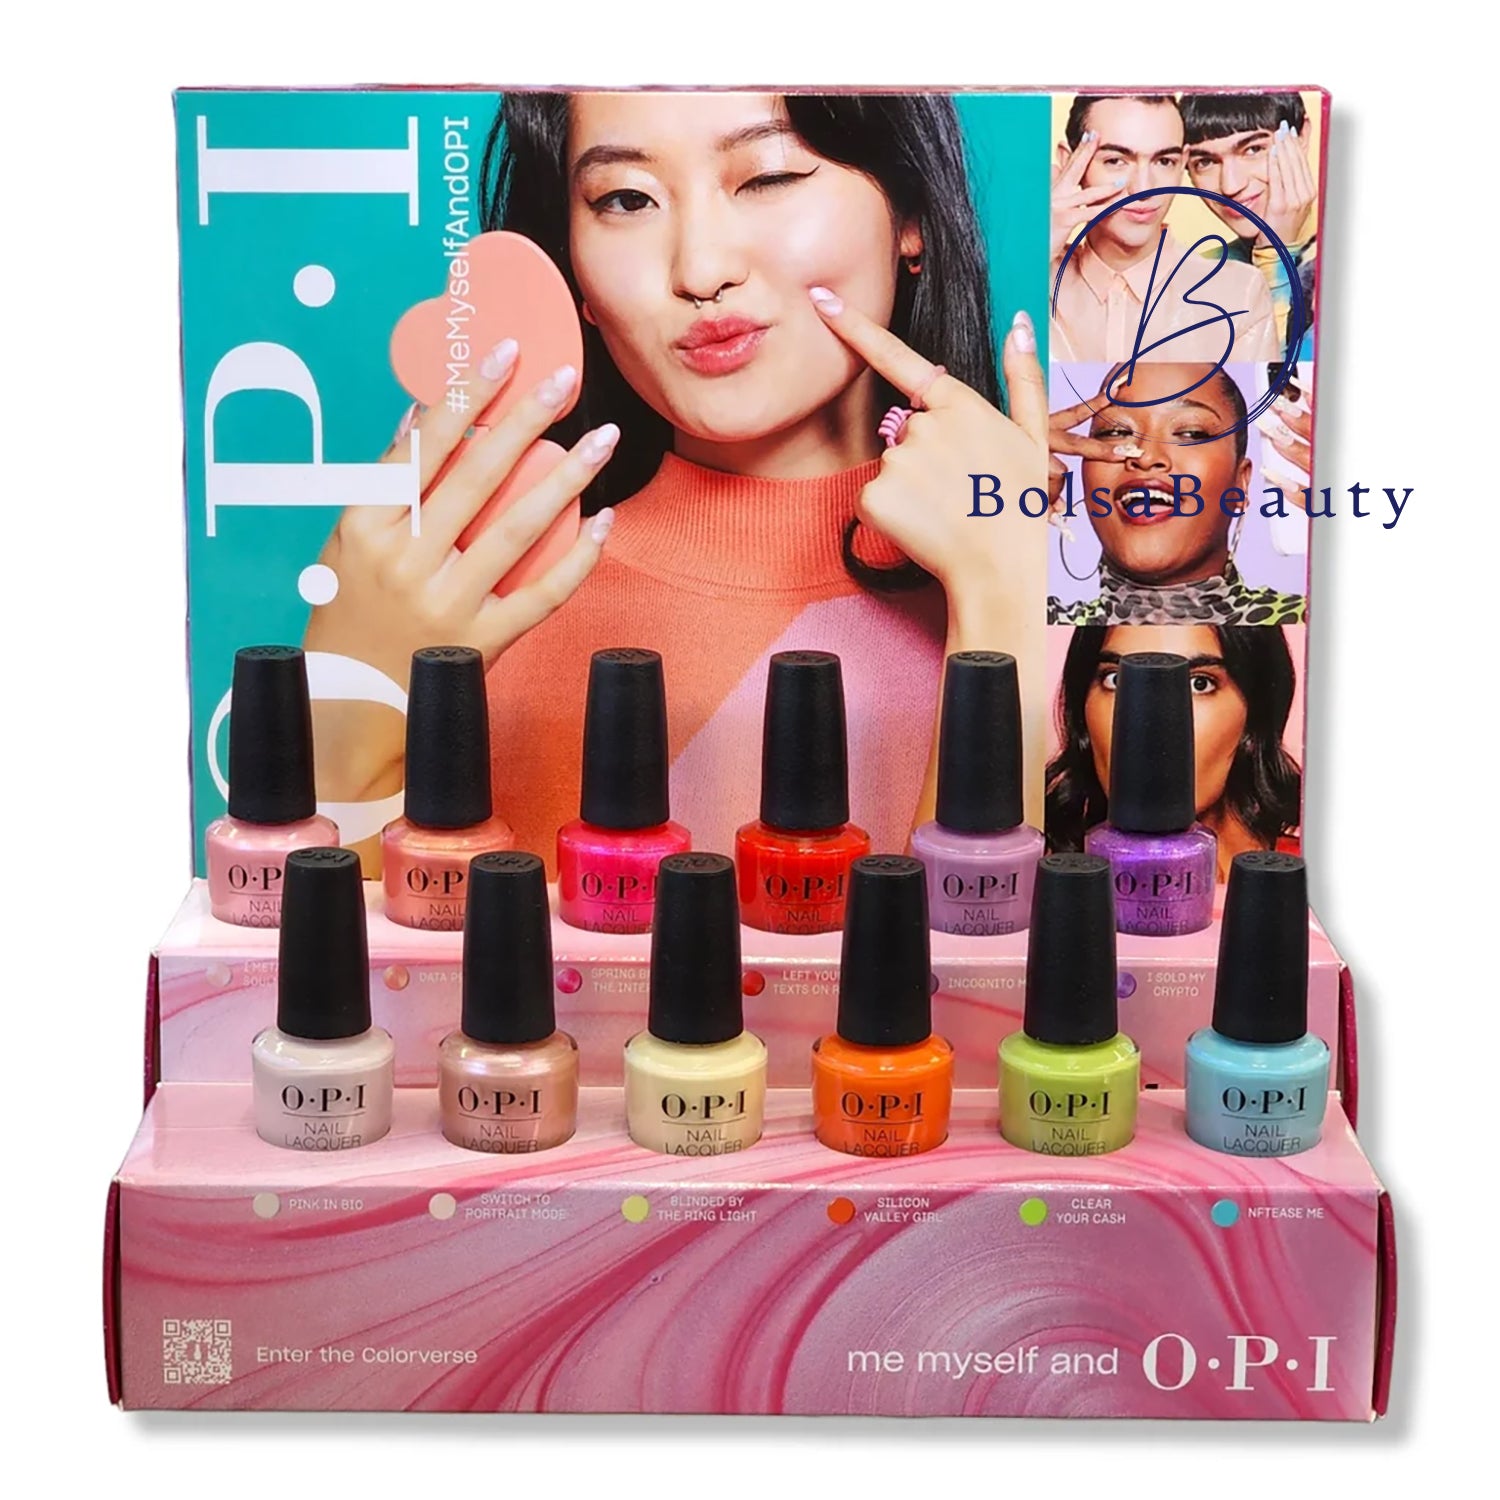 OPI - Nail the perfect gift by sending customized polish sets to your  friends! Visit the link to shop and send in a few short minutes.  https://bit.ly/2CTAHxh #NailedIt #ColorIsTheAnswer #RainbowOfHope  #CustomGift #OPINailLacquer #